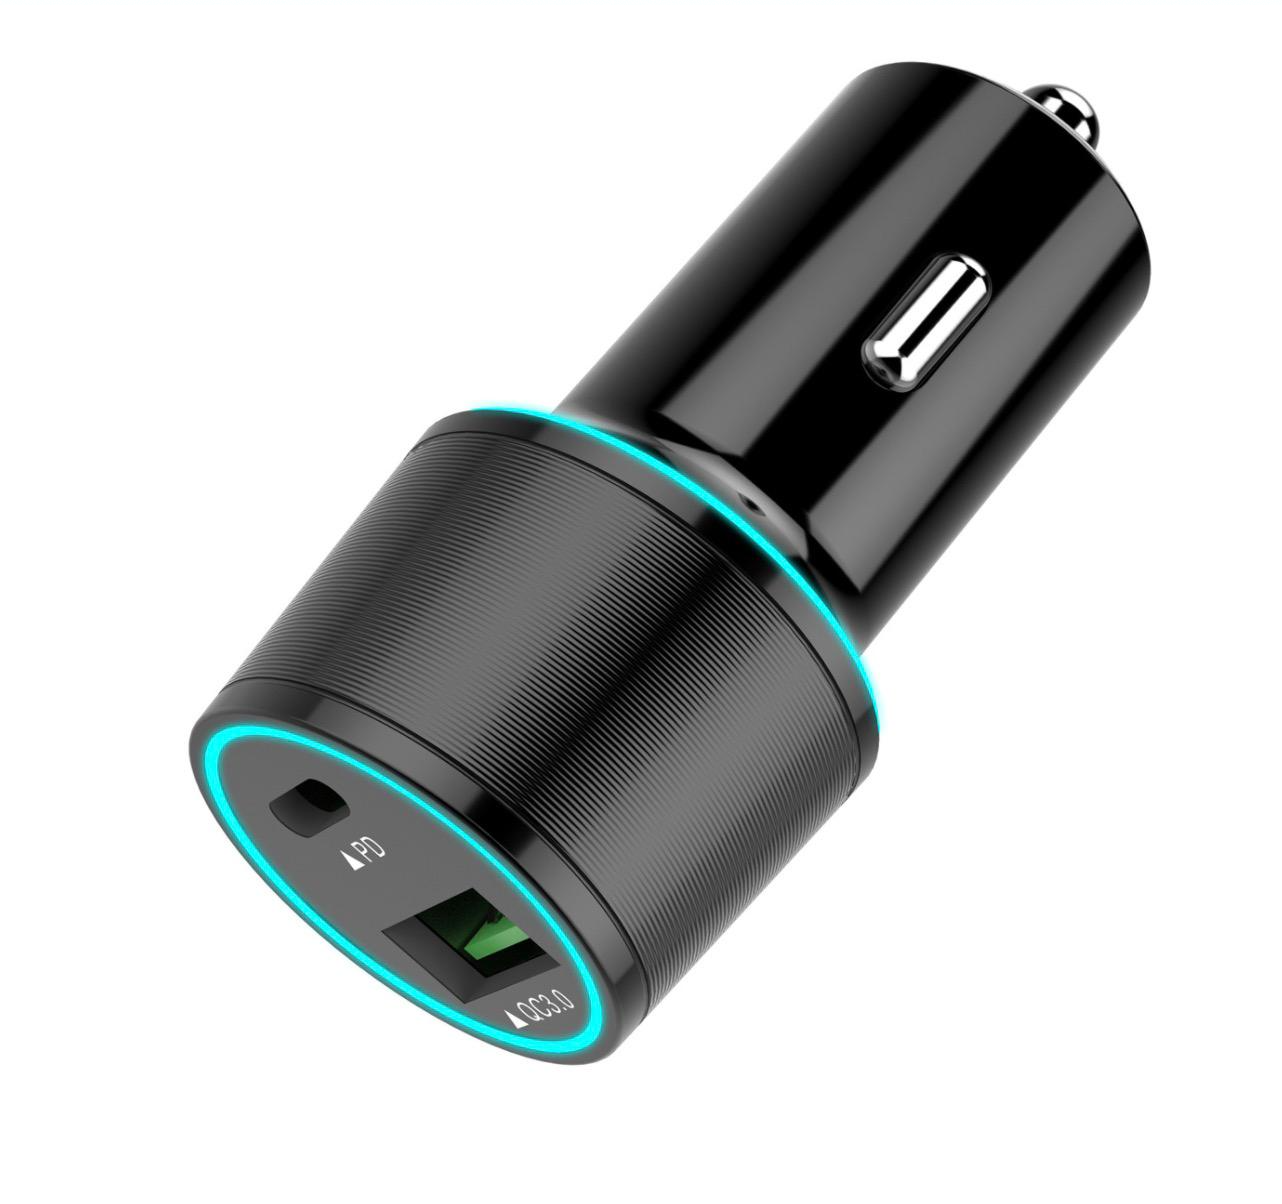 USB C Car Charger UrbanX 20W Car and Truck Charger For LG Q51 with Power Delivery 3.0 Cigarette Lighter USB Charger - Black, Comes with USB C to USB C PD Cable 3.3FT 1M - image 2 of 3